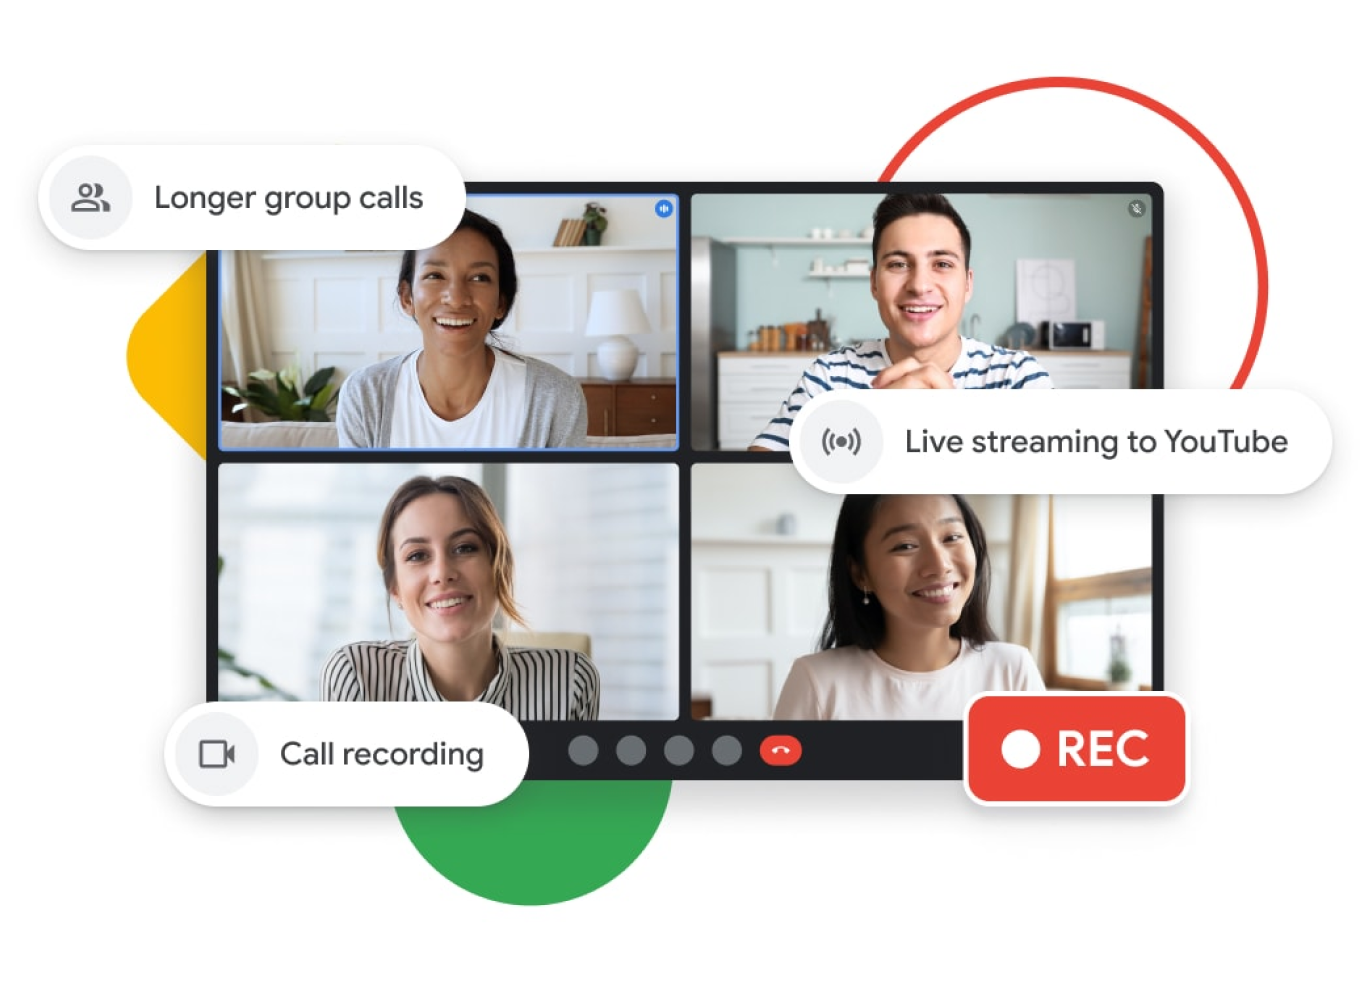 Graphic illustration of a Google Meet call with longer group calls, live streaming to YouTube and call recording features.